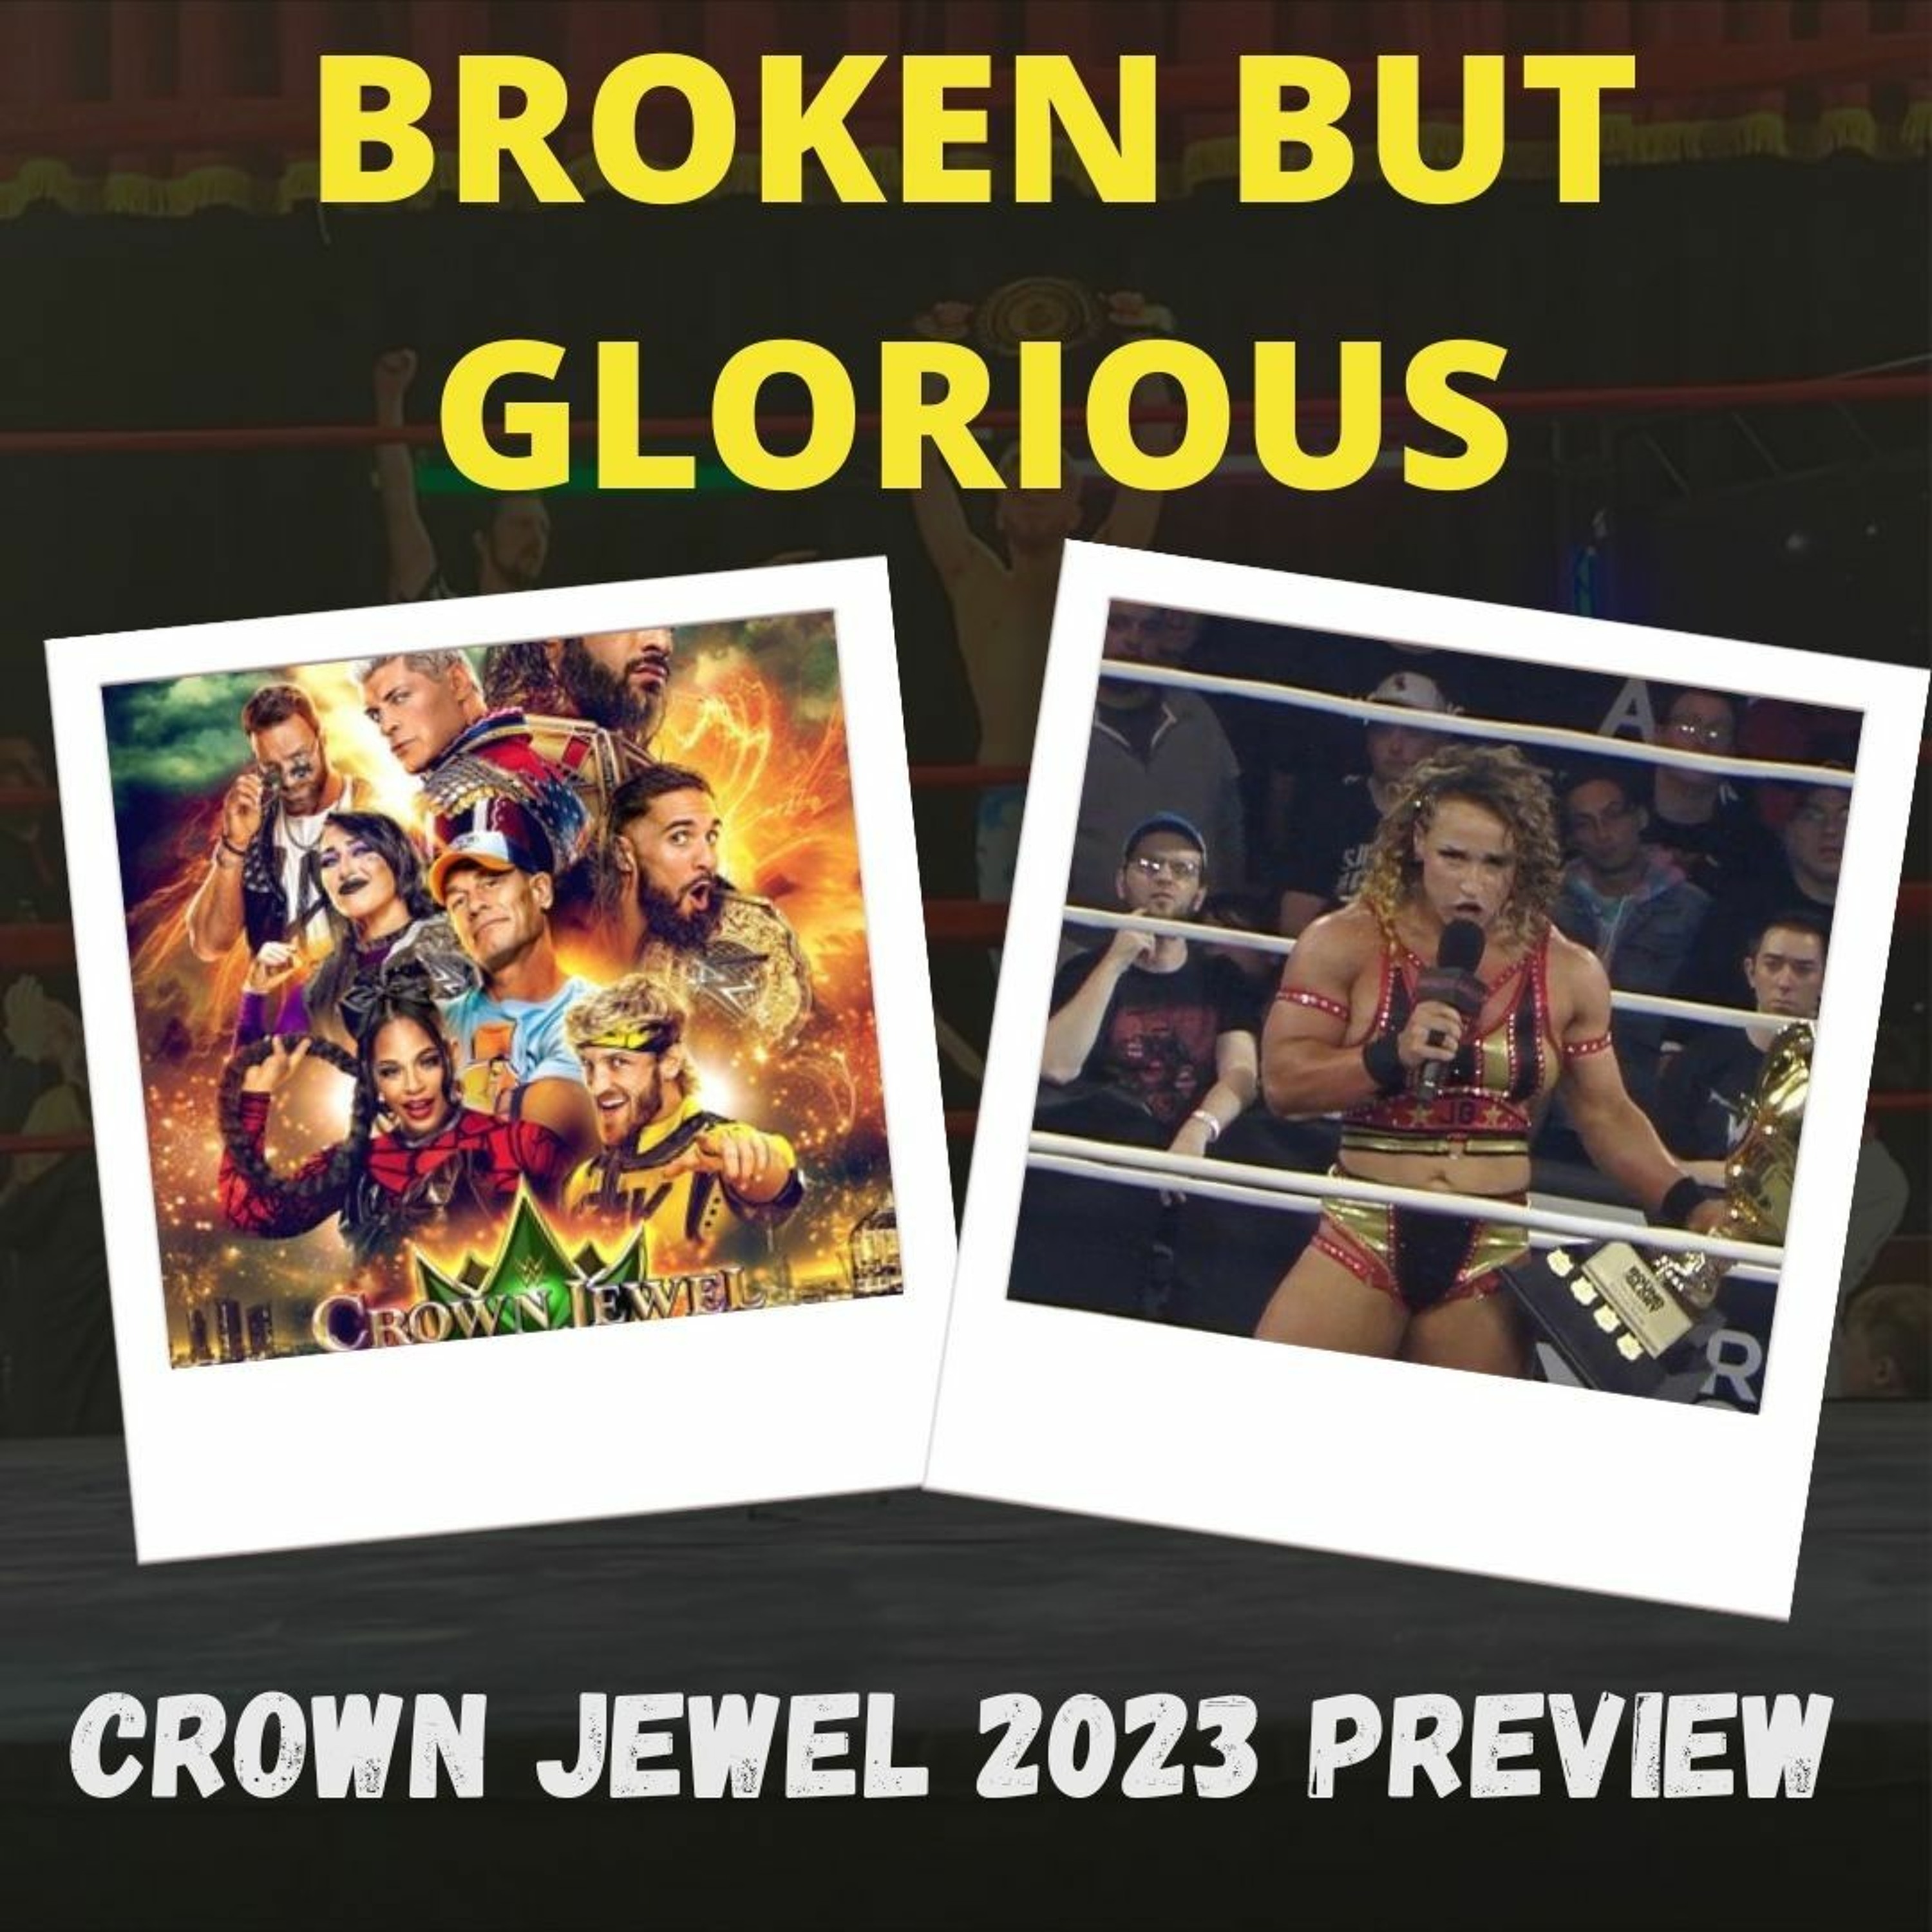 Crown Jewel 2023 Preview plus an Impact Wrestling news round up